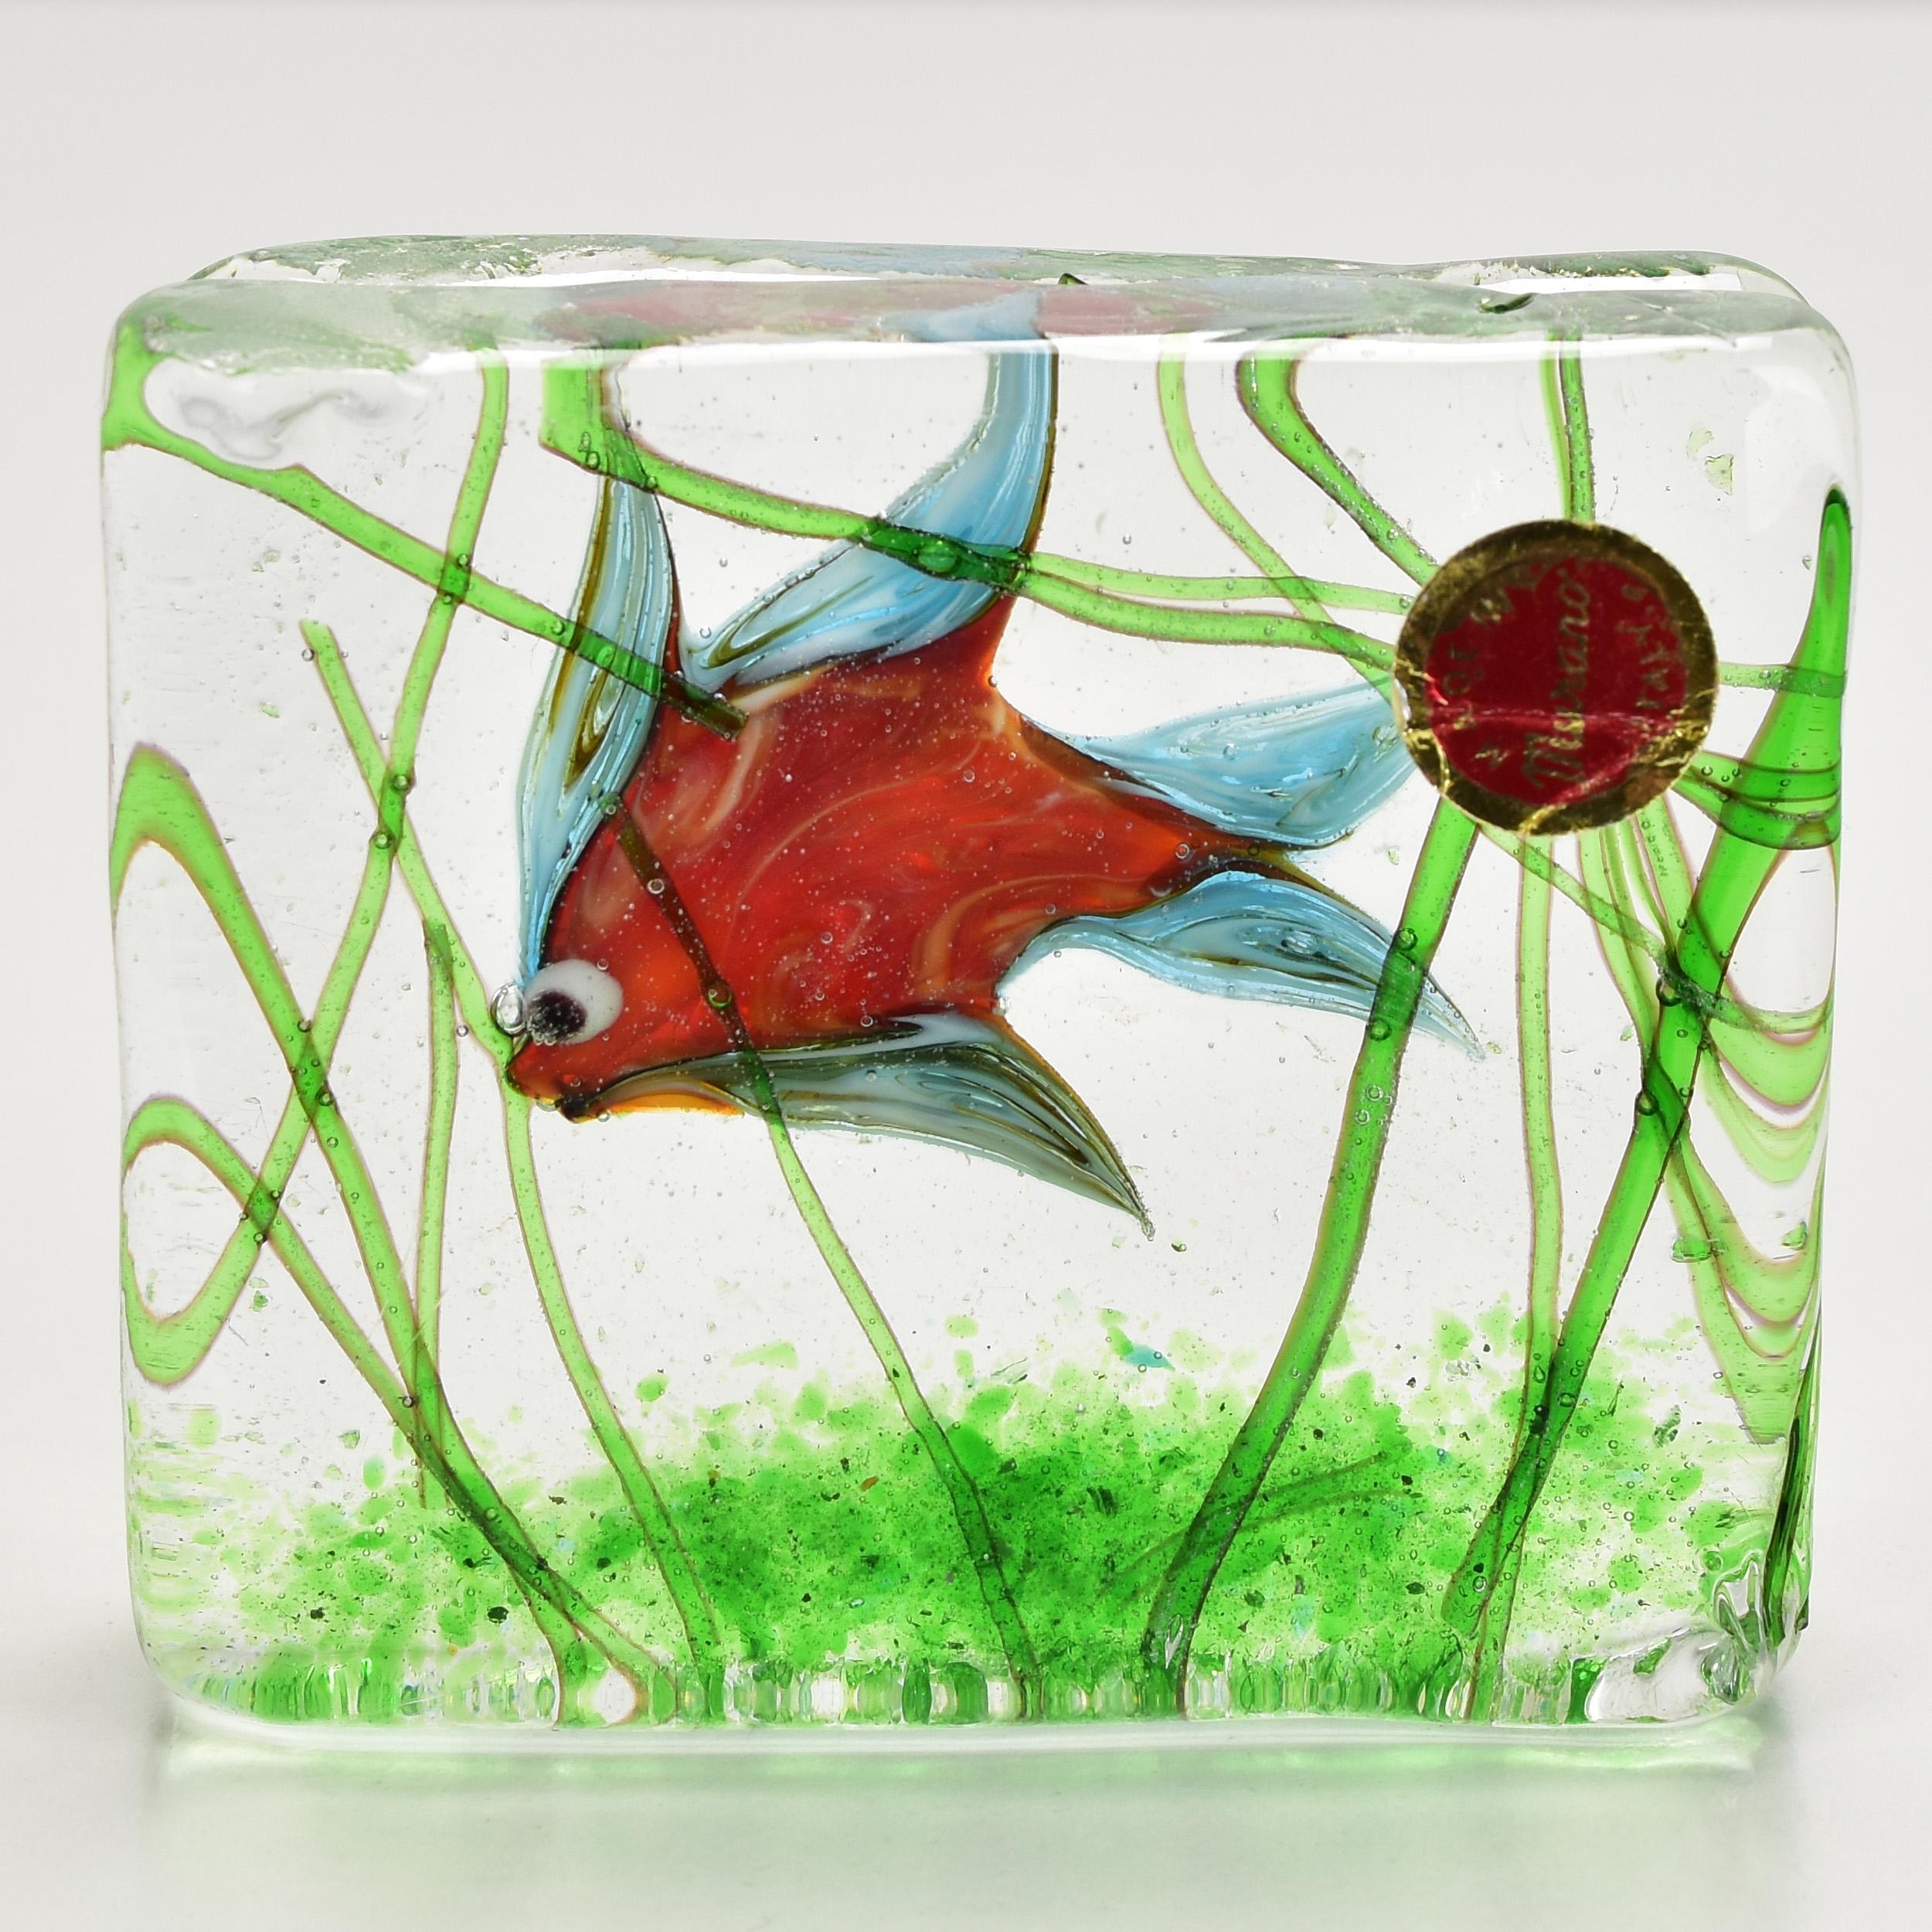 Lovely Murano aquarium fish tank block paperweight. A colorful tropical fish inside a glass block with green seaweed. A highly decorative sculpture for any desk or shelf.
 